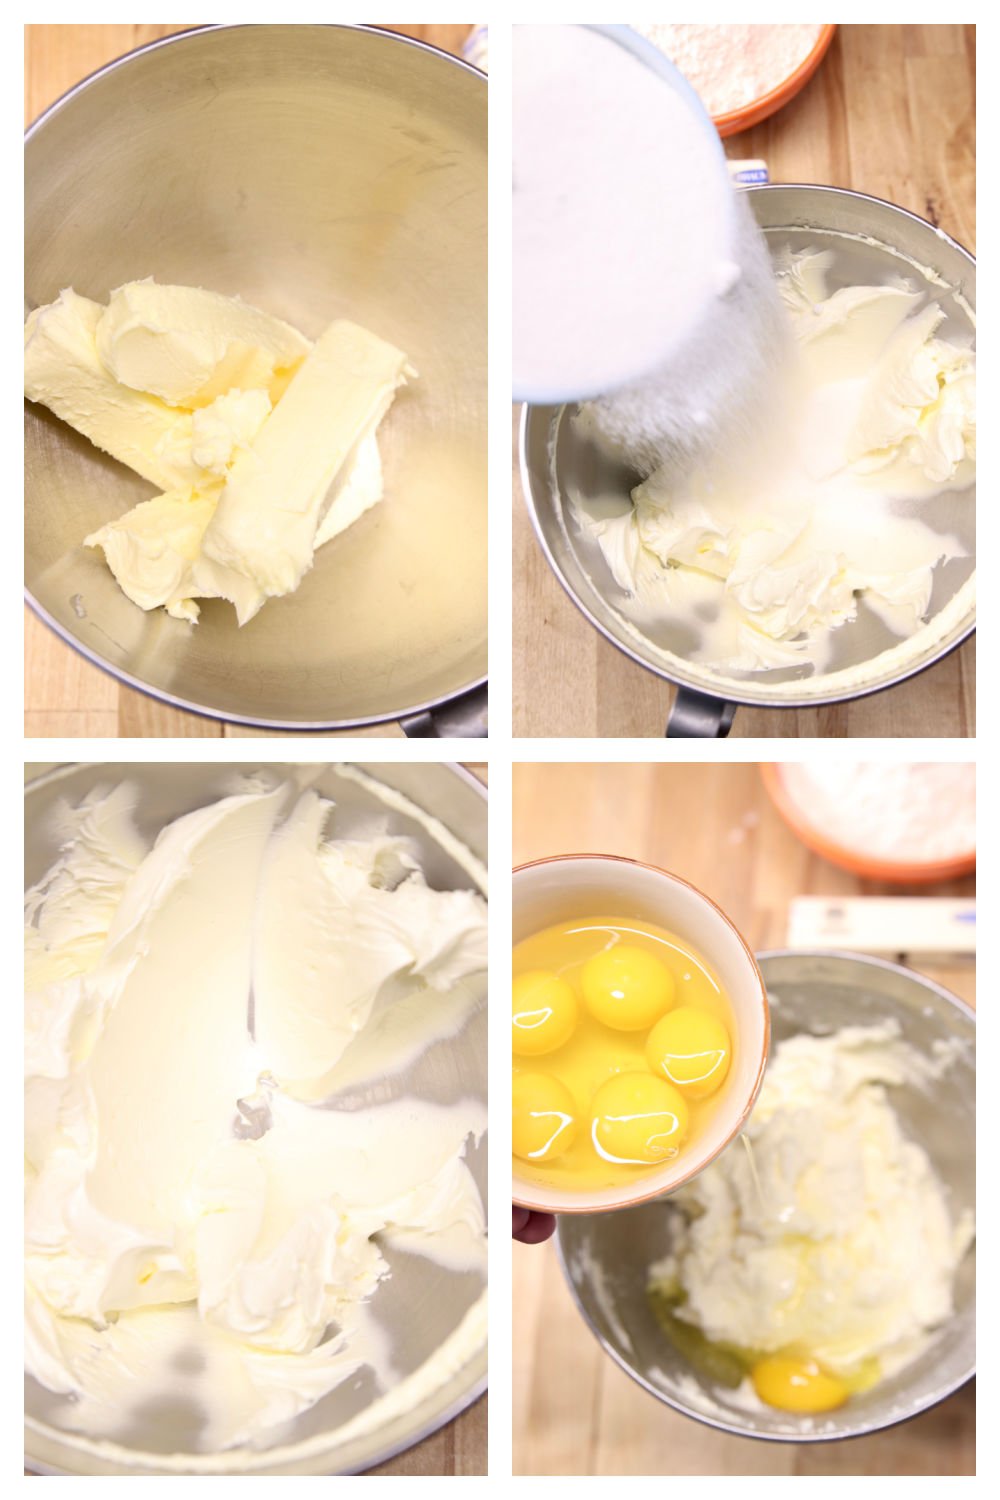 step by step creaming butter, adding sugar and then eggs for pound cake